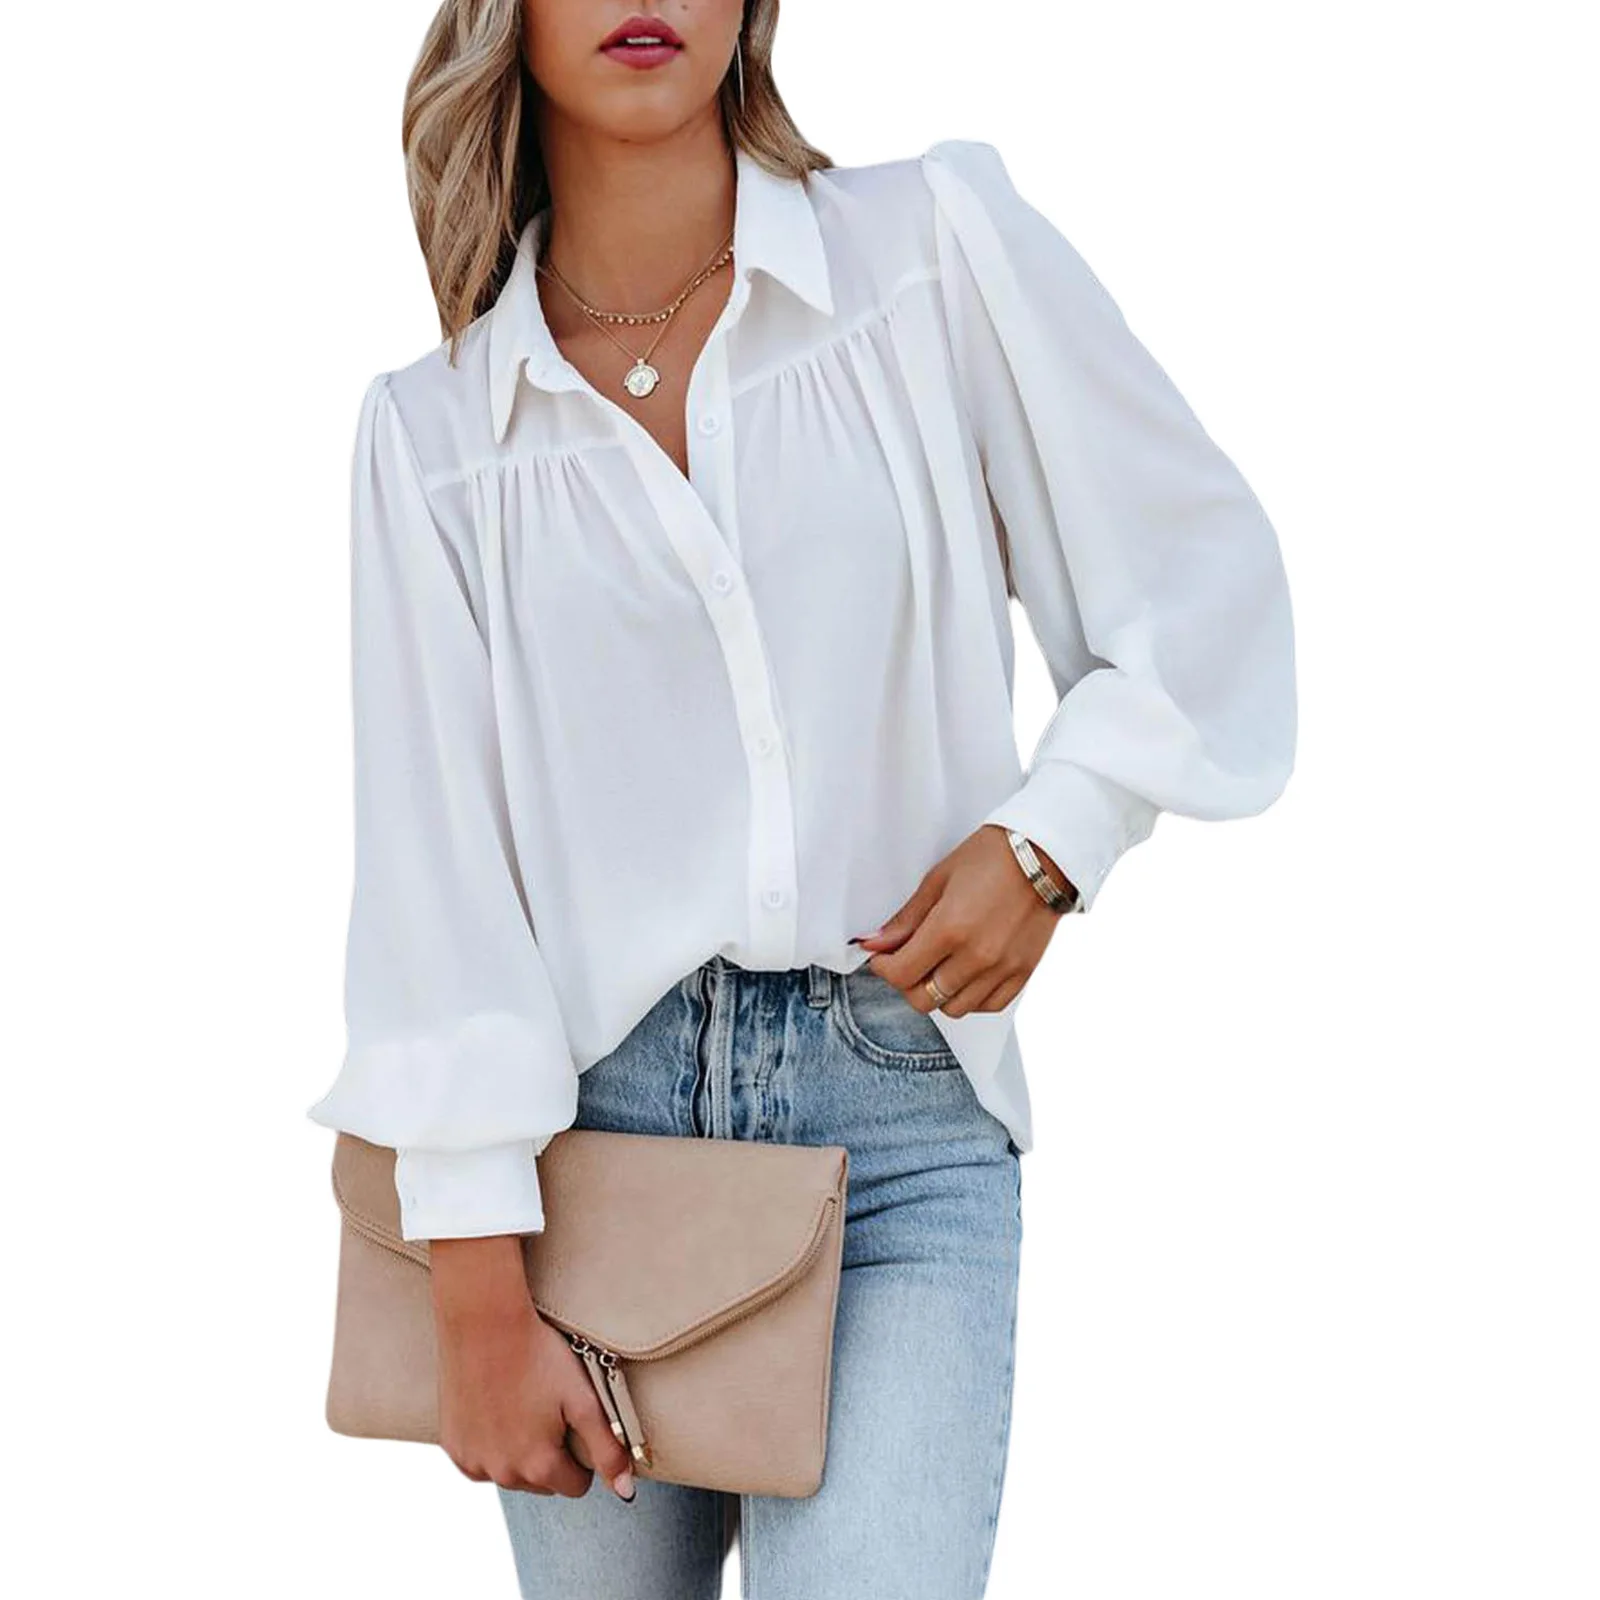 Blouse Women Fashion Long Sleeve Button-Up Shirt Lantern Sleeve Pleated Solid Color Stand Collar Loose Tops for Women Camisas